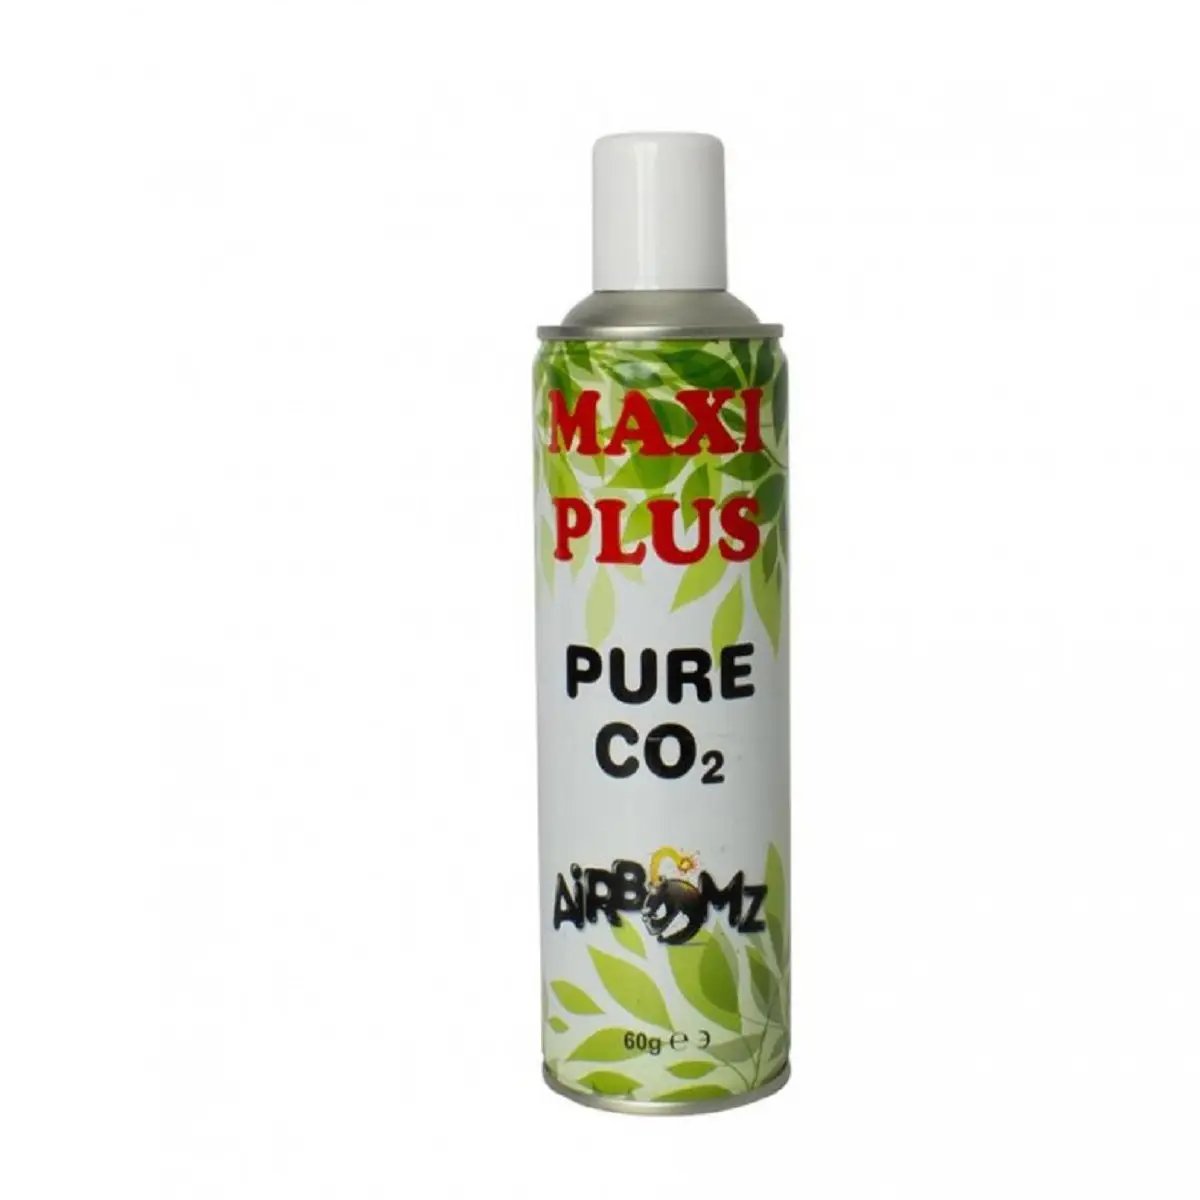 Airbomz Recharge Maxi plus Pure CO2